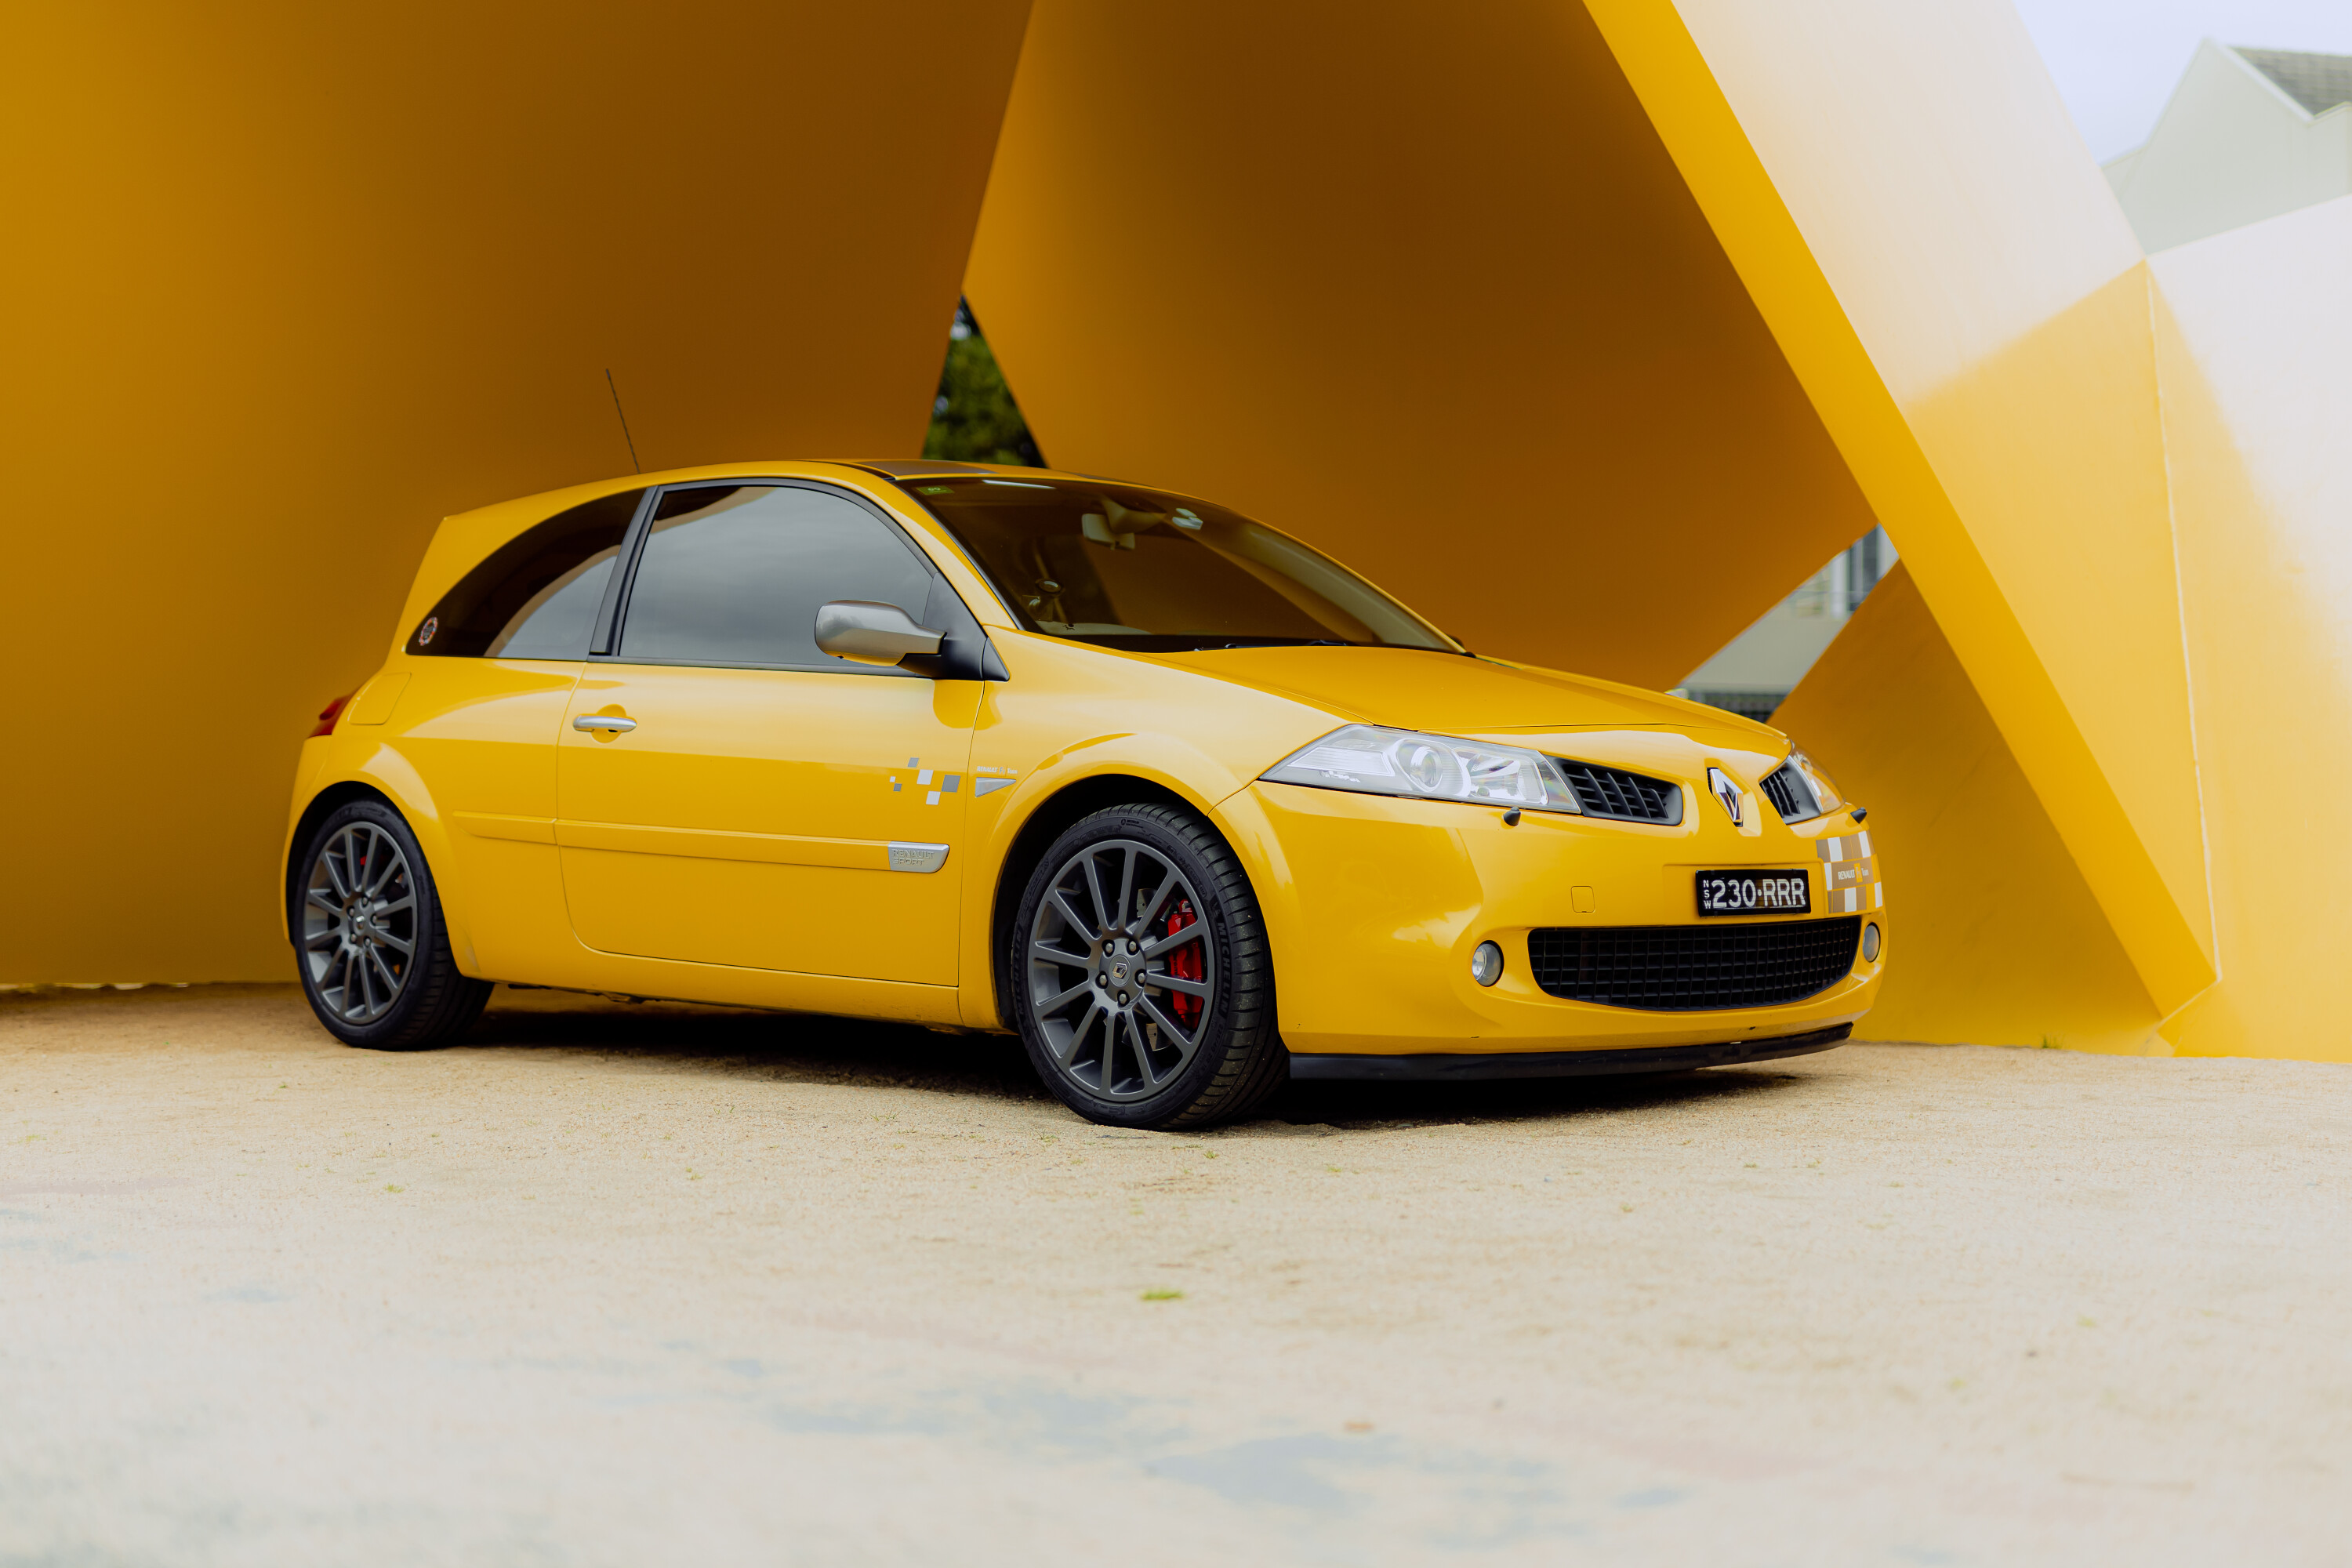 29231ce5/renaultsport megane 230 f1 team r26 coupe yellow abrook 20 jpg